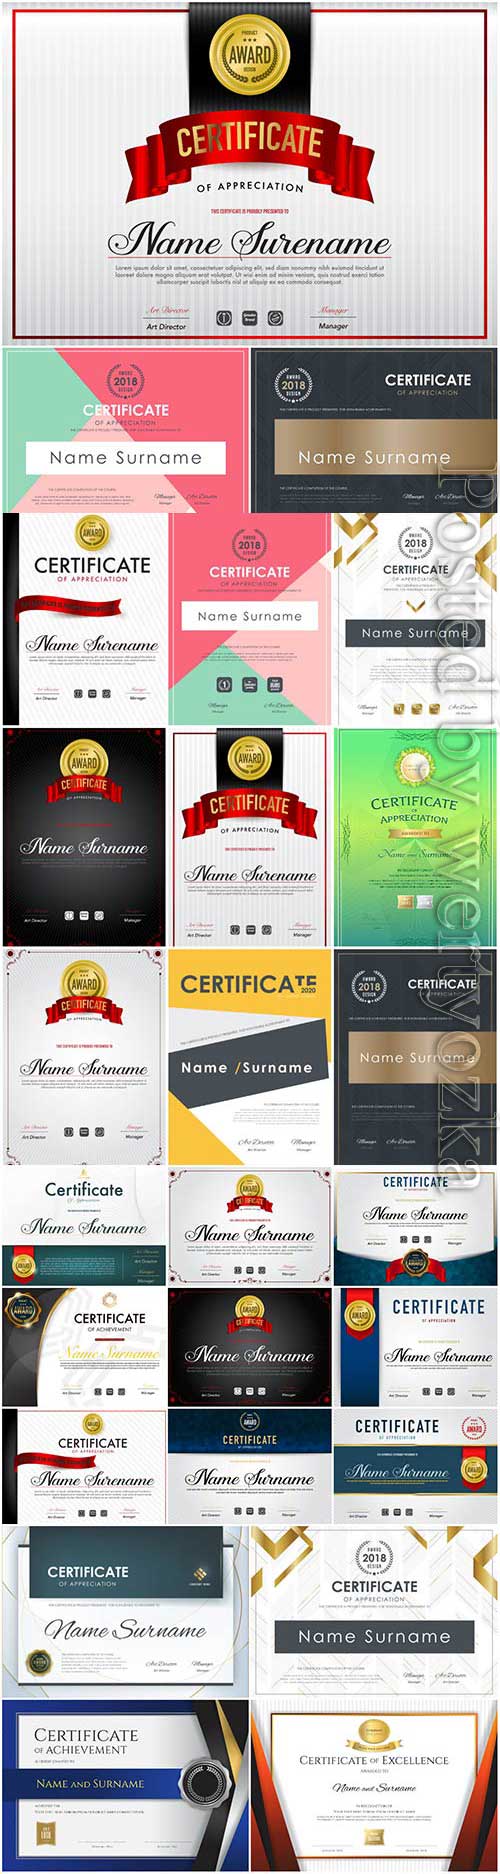 Certificates and diplomas with various designs in vector